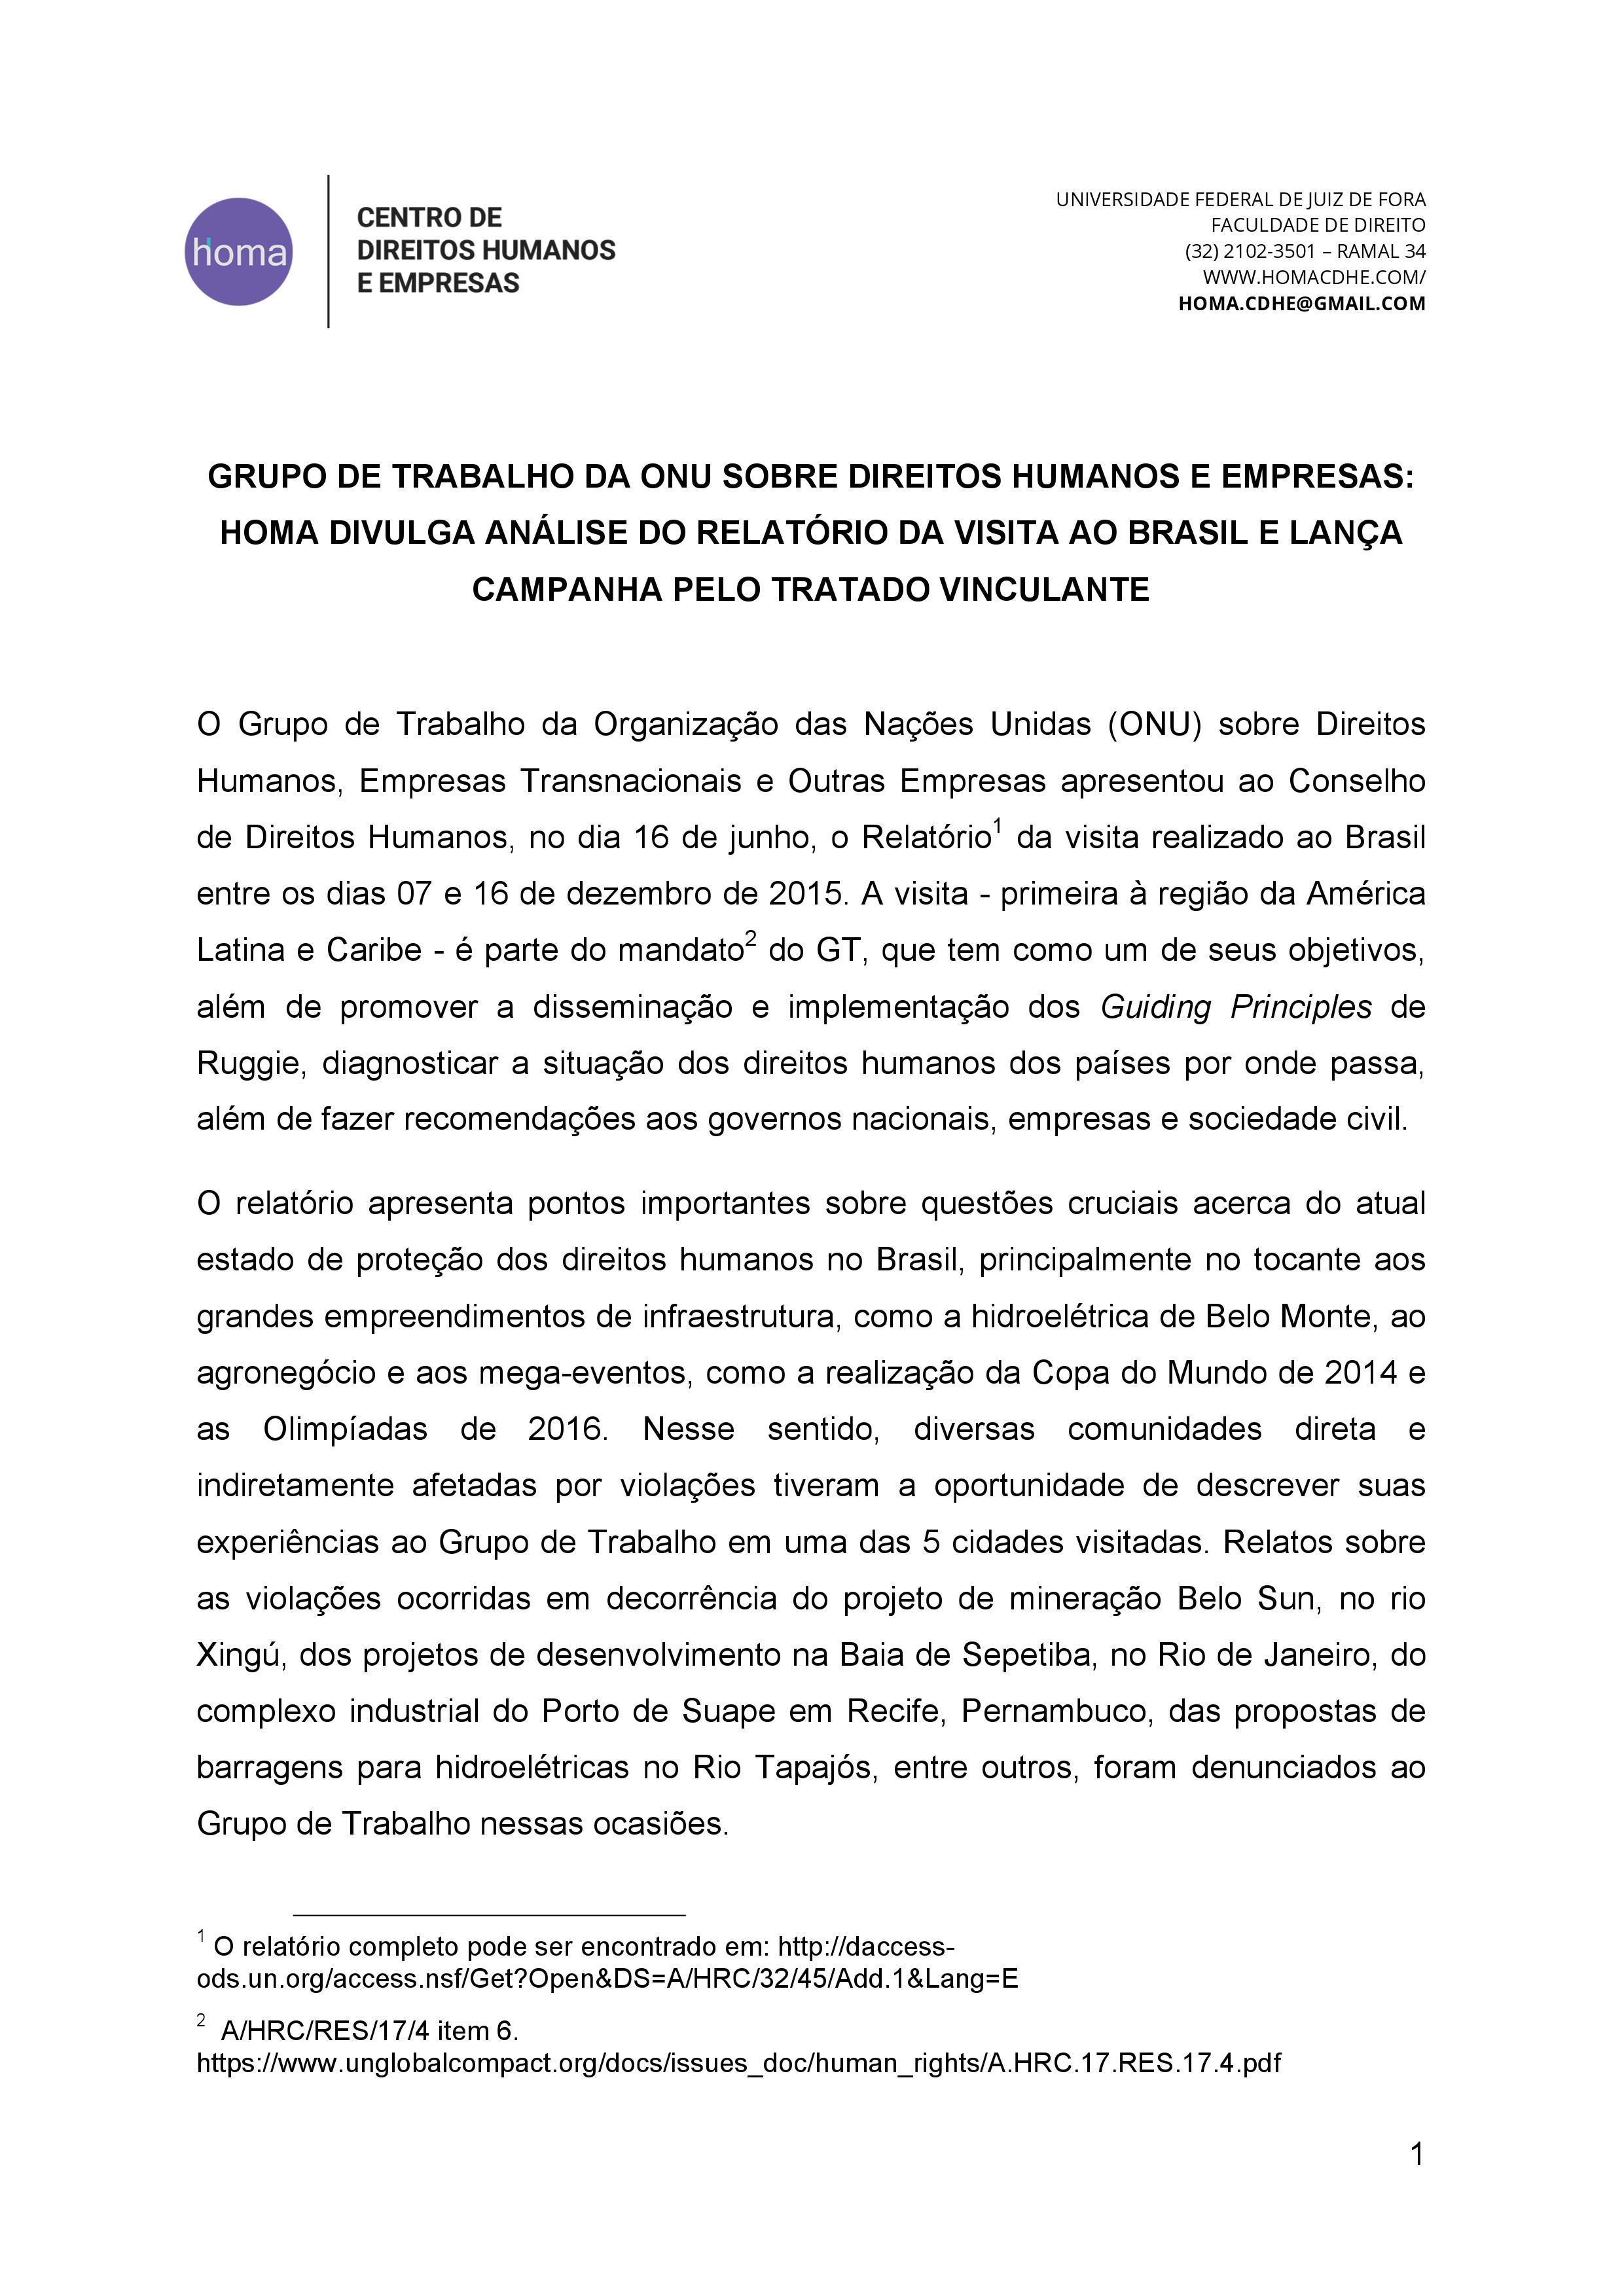 UN Working Group on Human Rights and Business: analysis of the report of the visit to Brazil